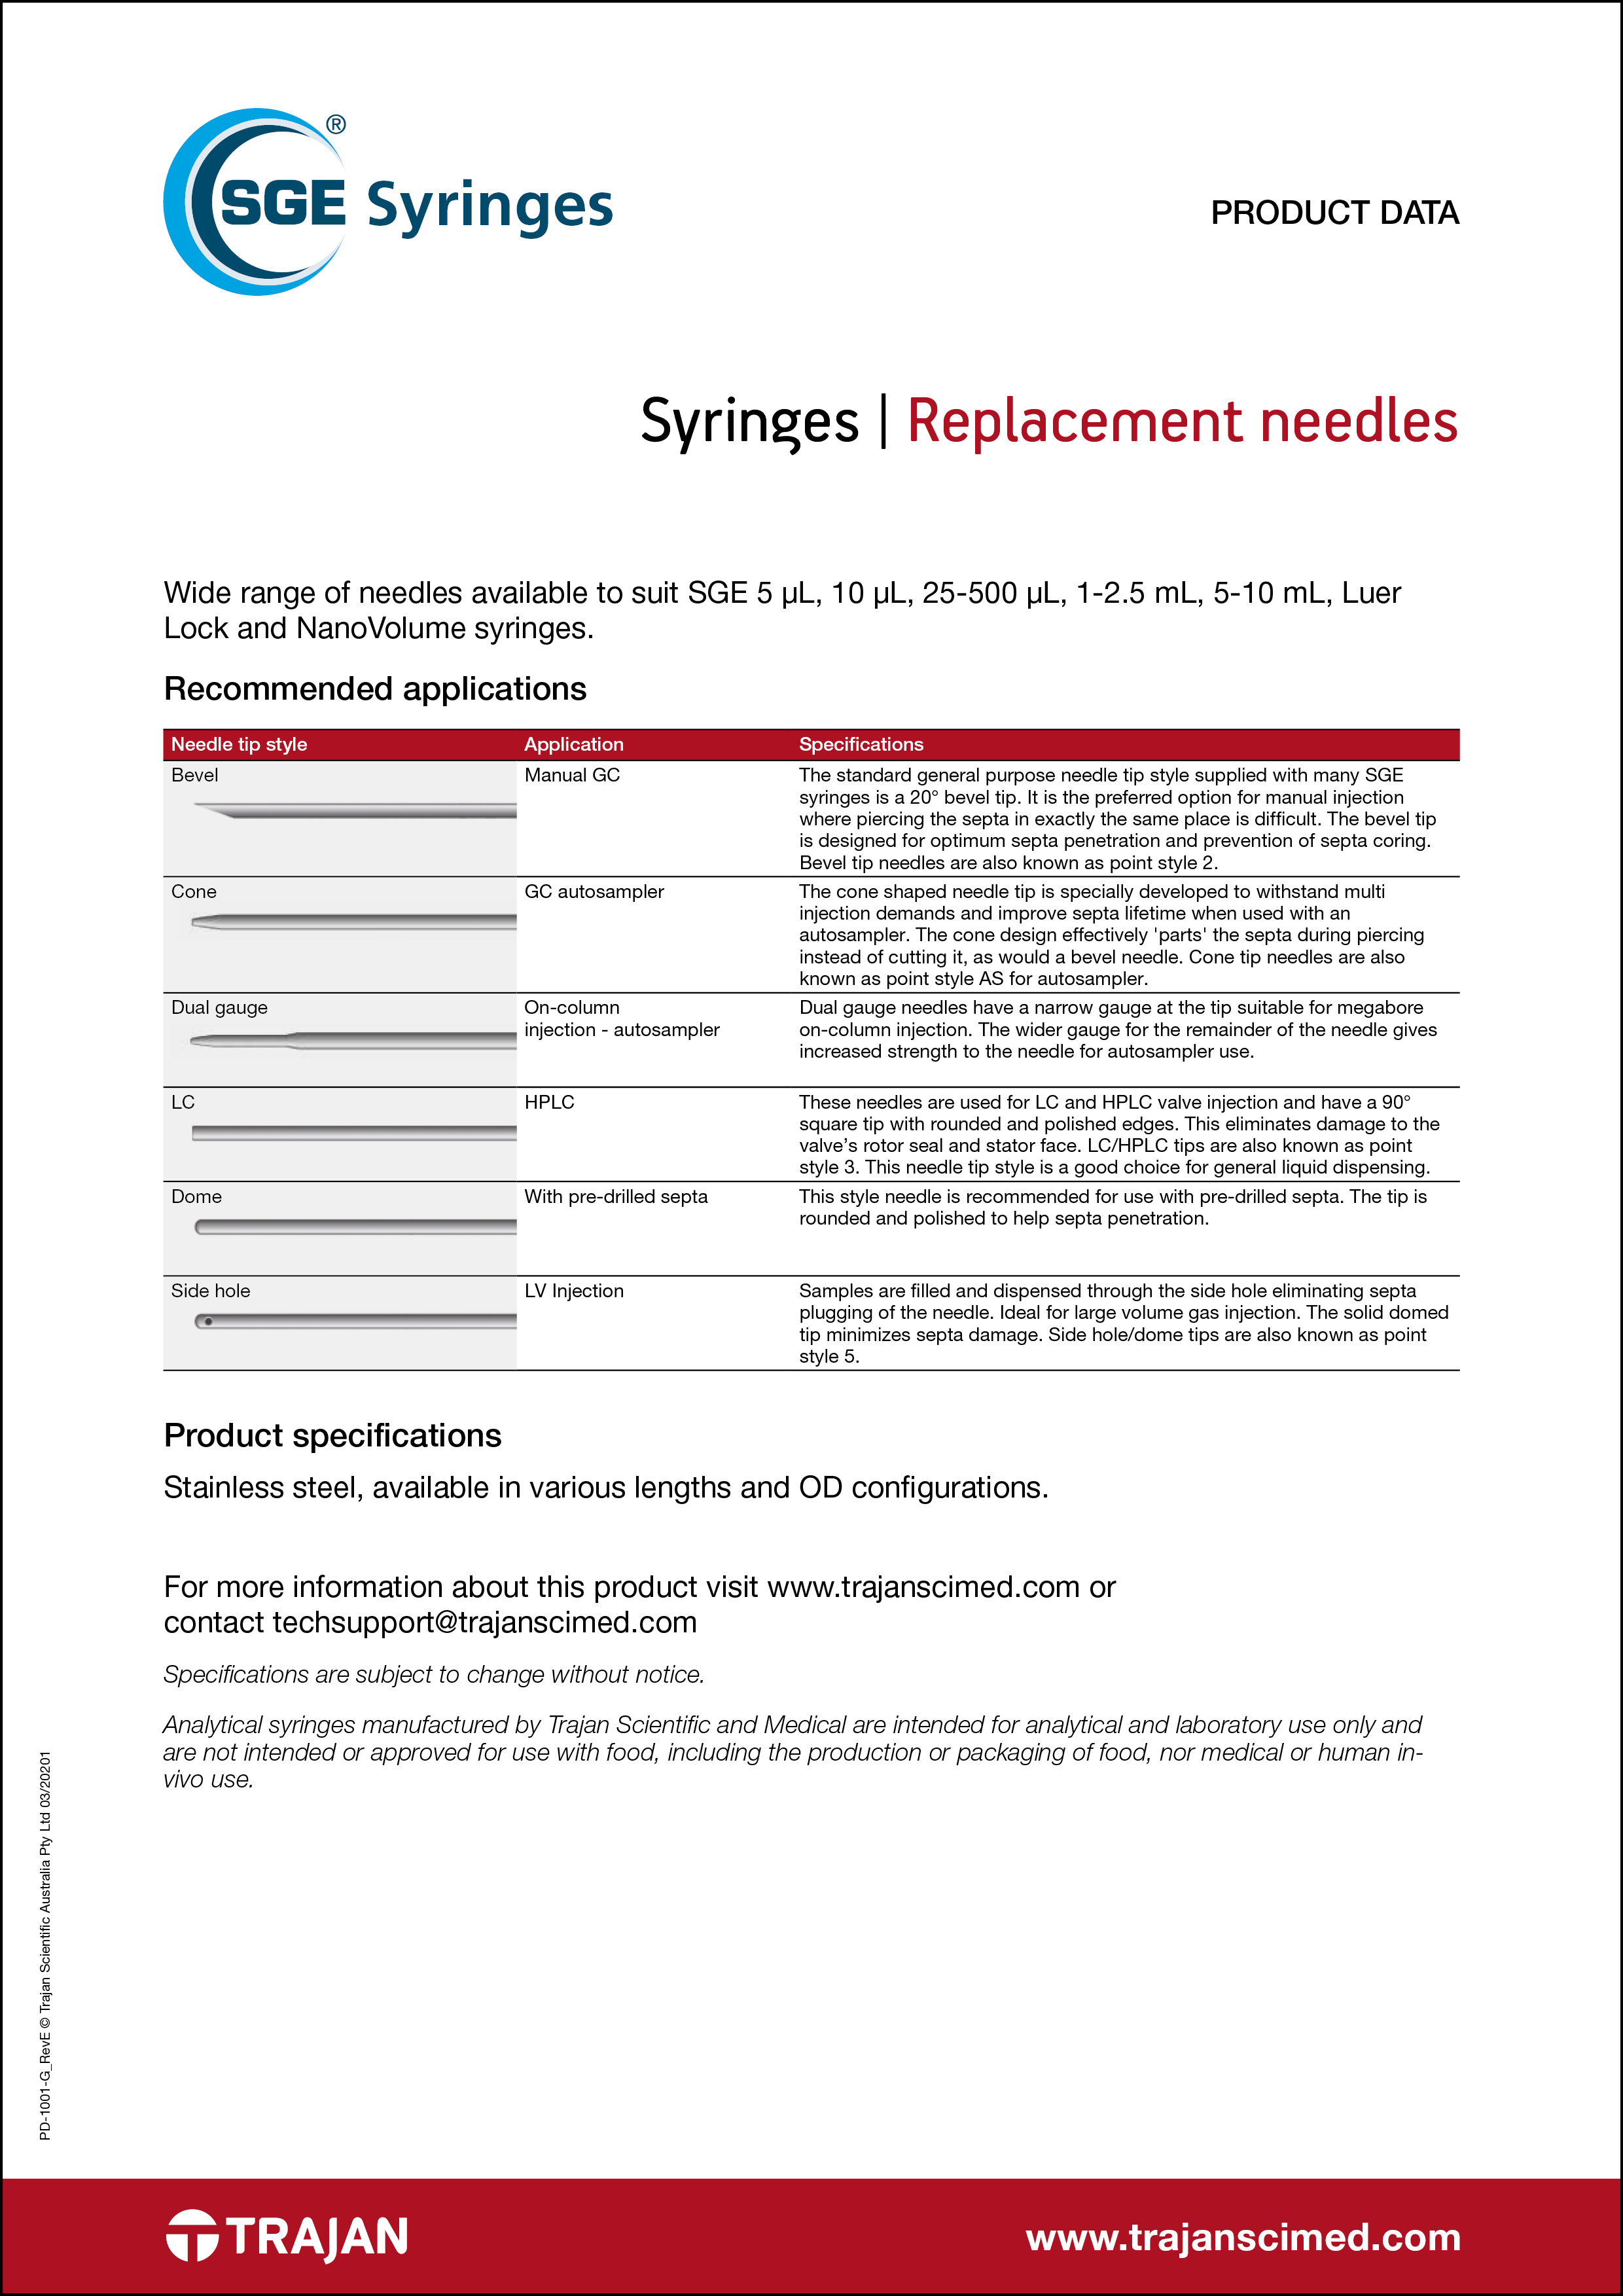 Product Data Sheet - Replacement needles